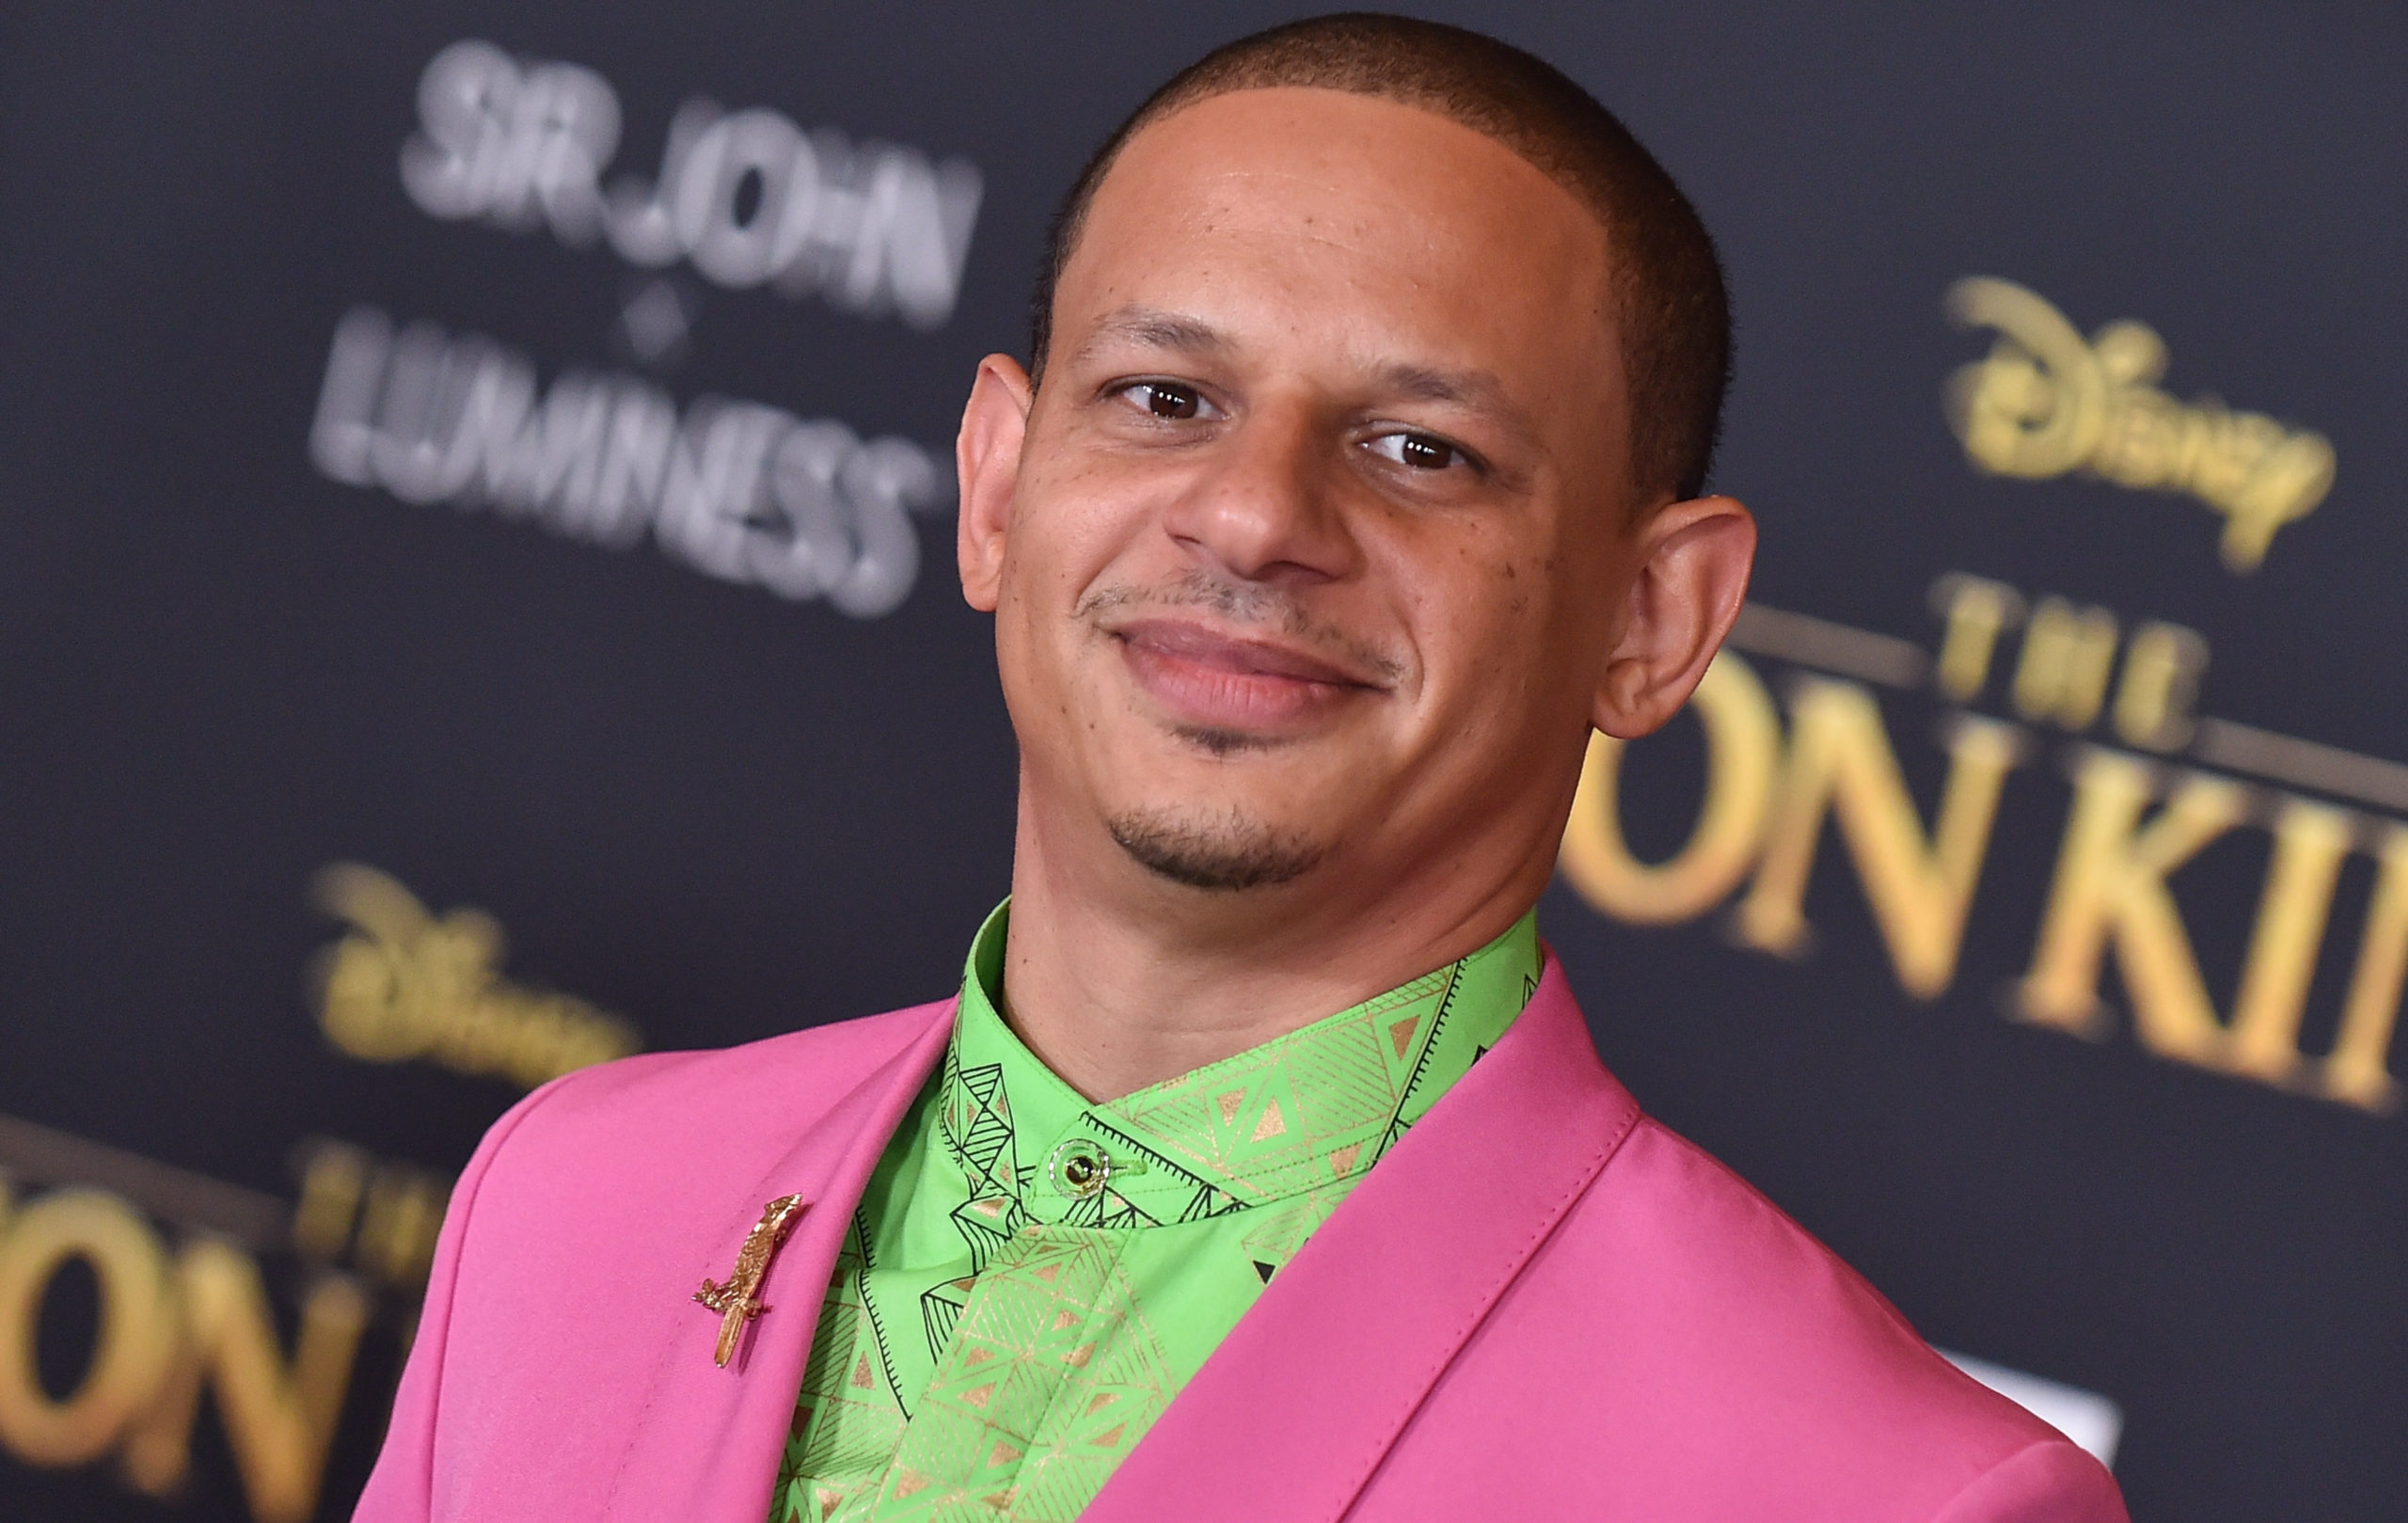 LOS ANGELES - JUL 09 Eric Andre arrives for Disney's 'The Lion King' World Premiere on July 09, 2019 in Hollywood, CA